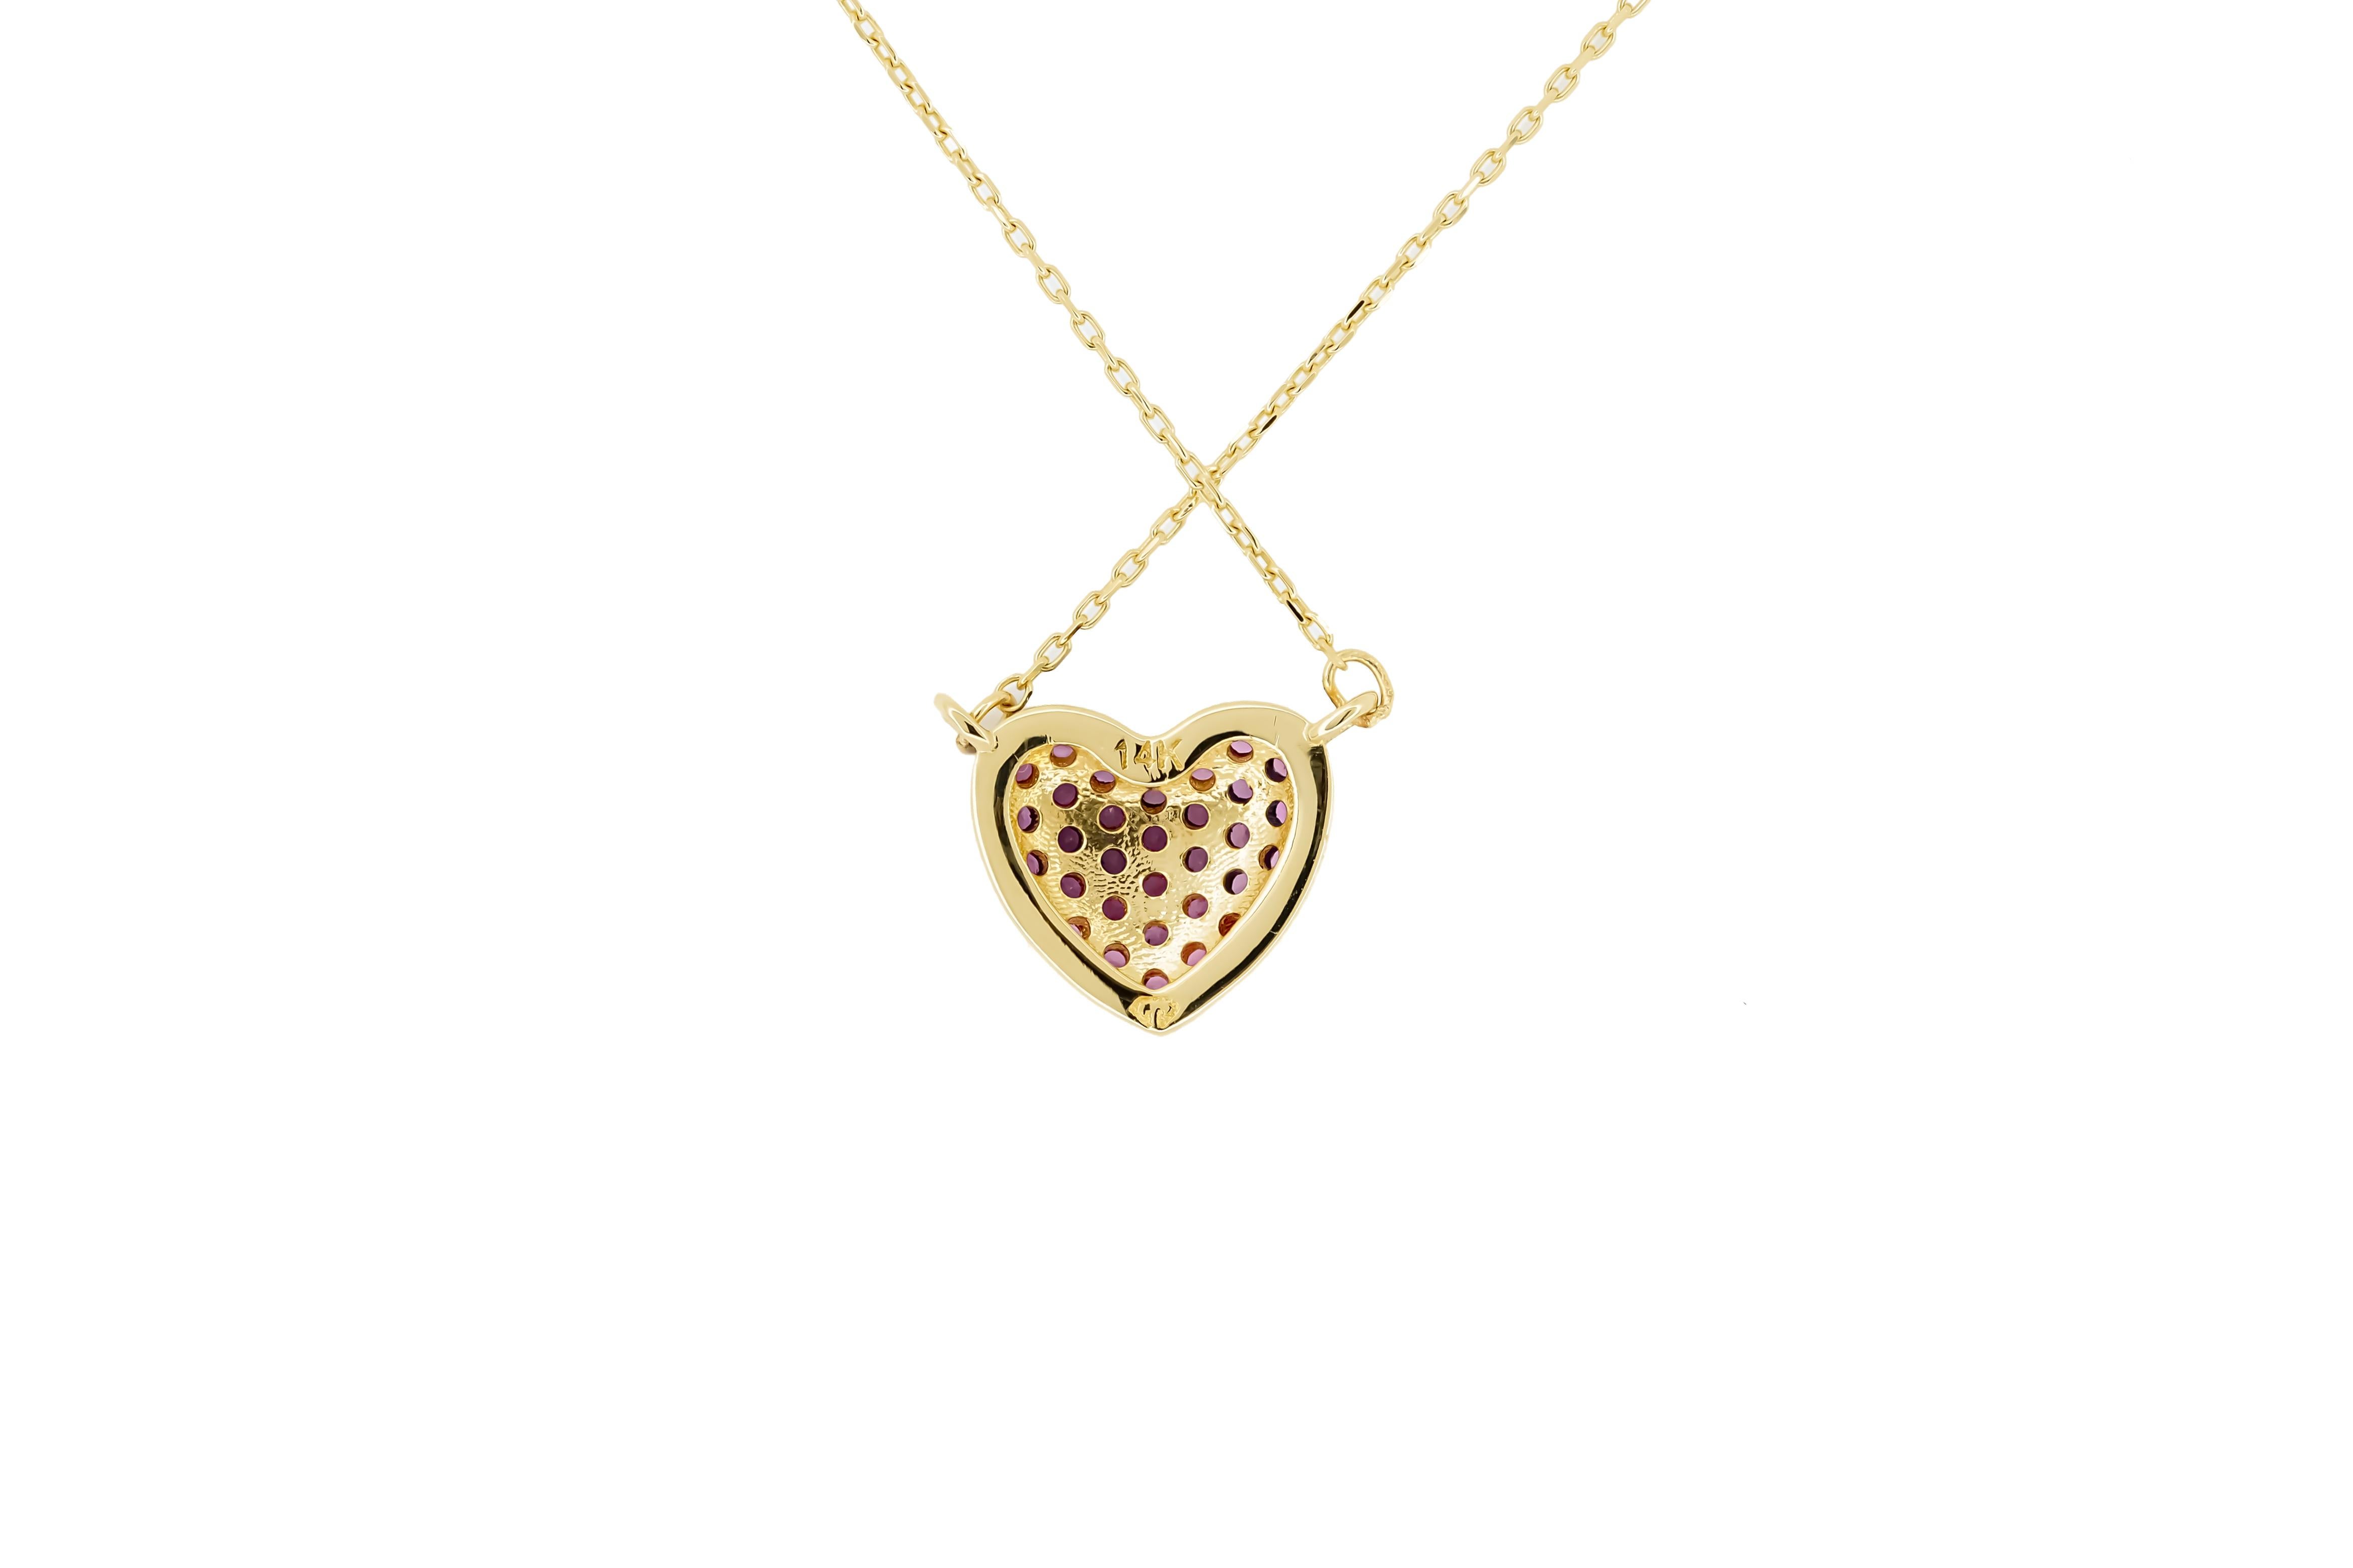 Round Cut Heart shaped 14k gold pendant necklace. 